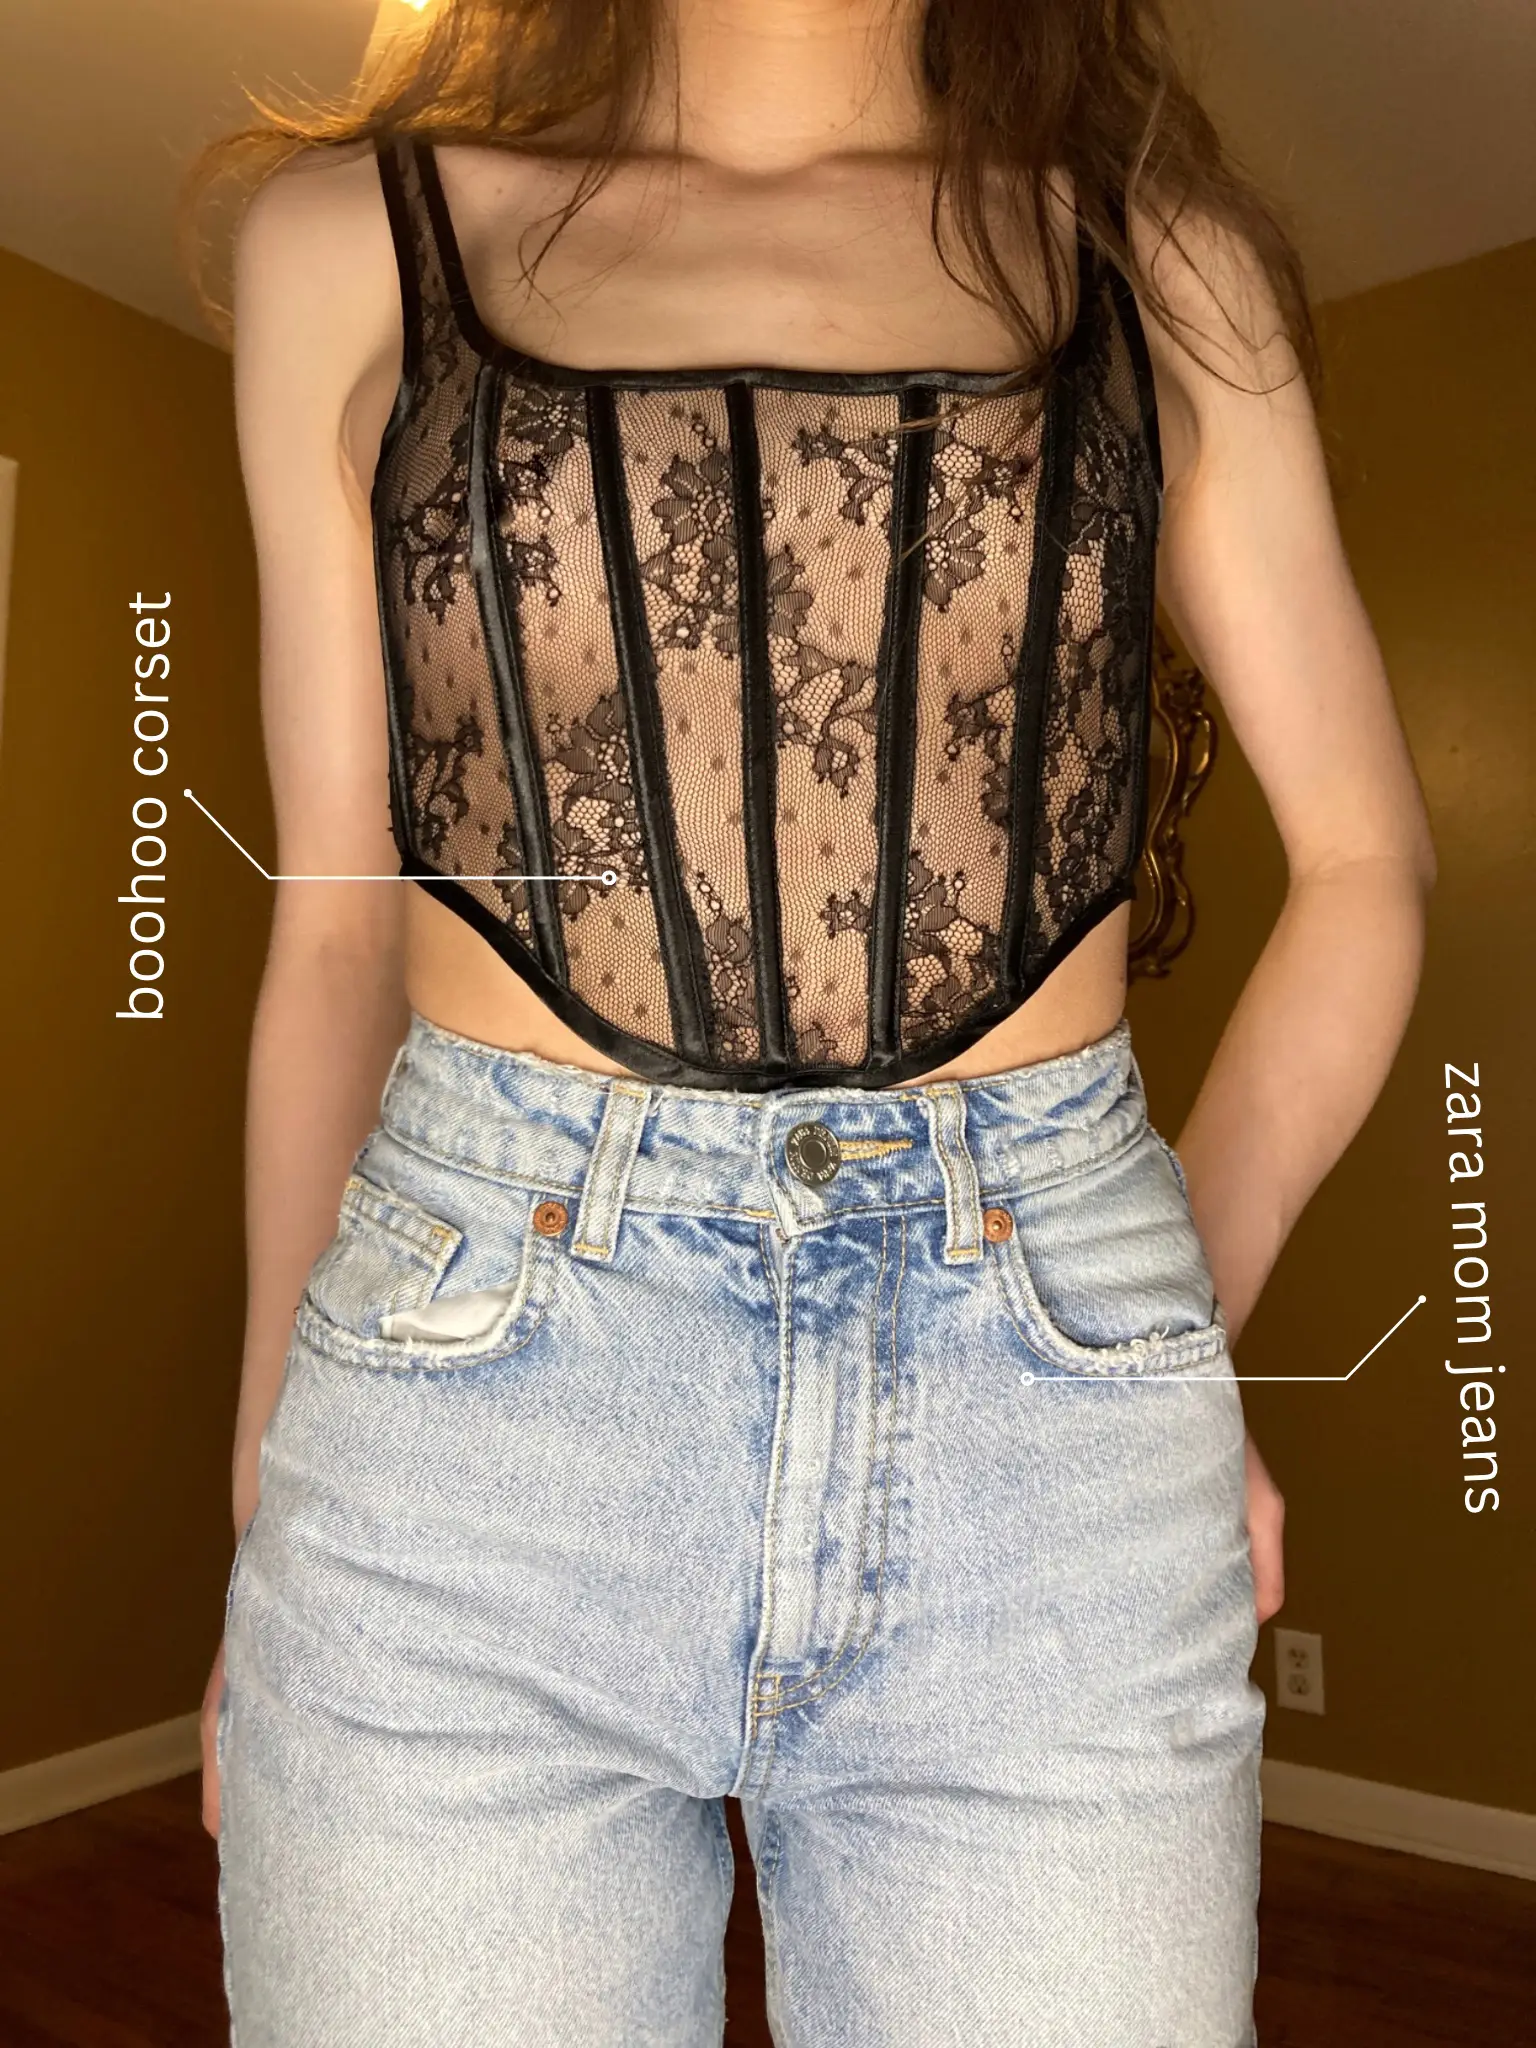 Petite Corset Try On, Gallery posted by Abby